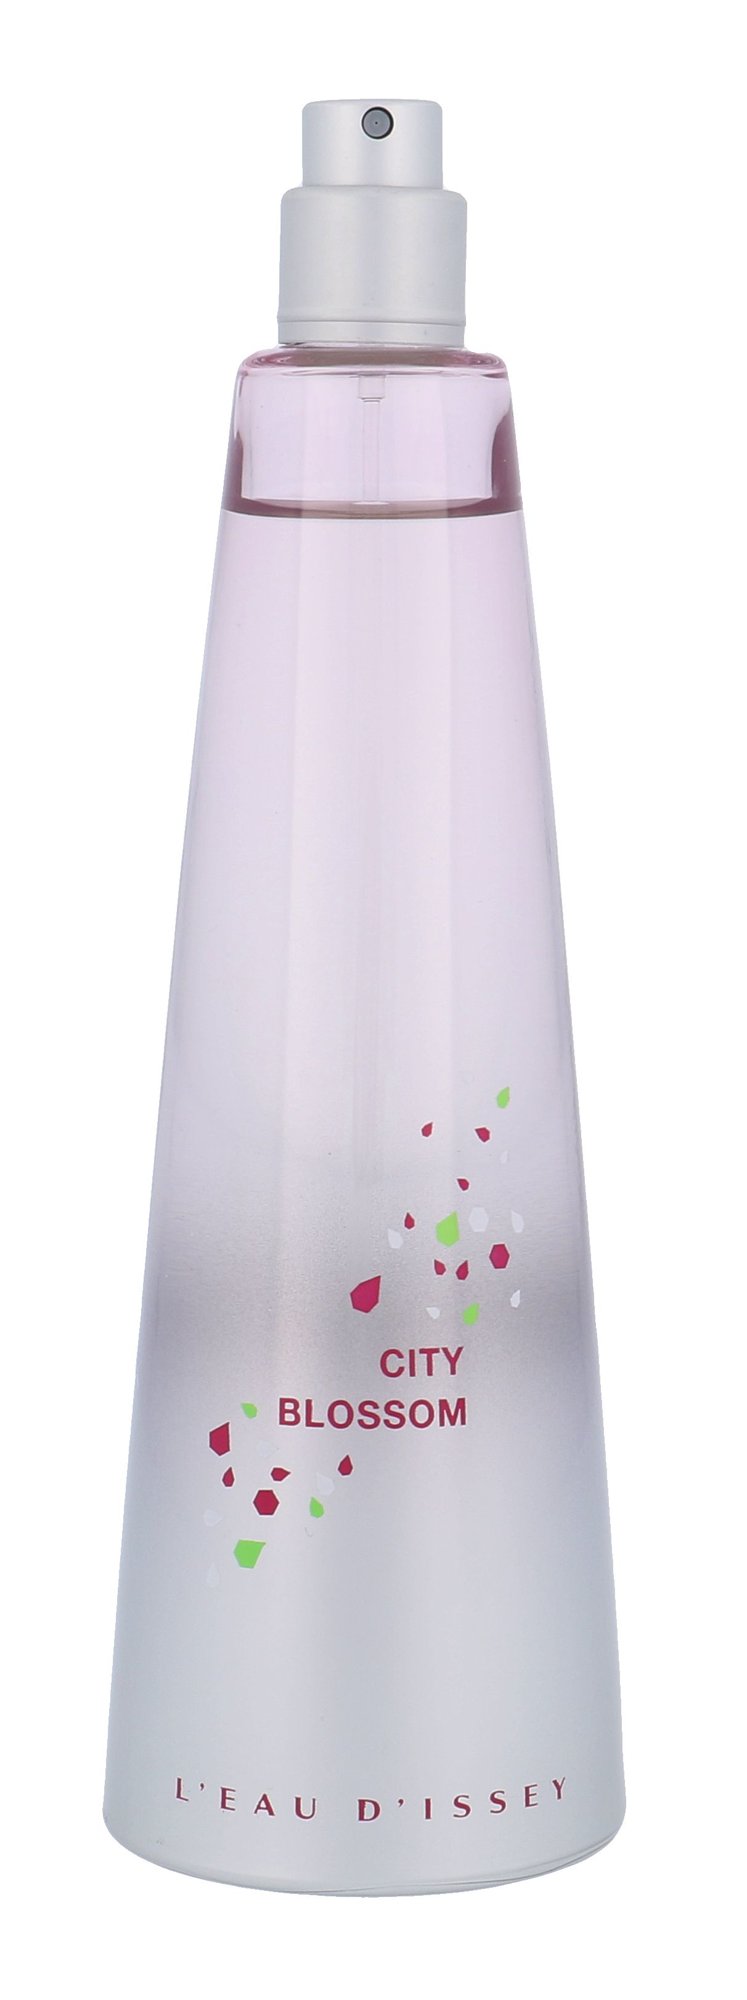 Issey Miyake L´Eau d´Issey City Blossom